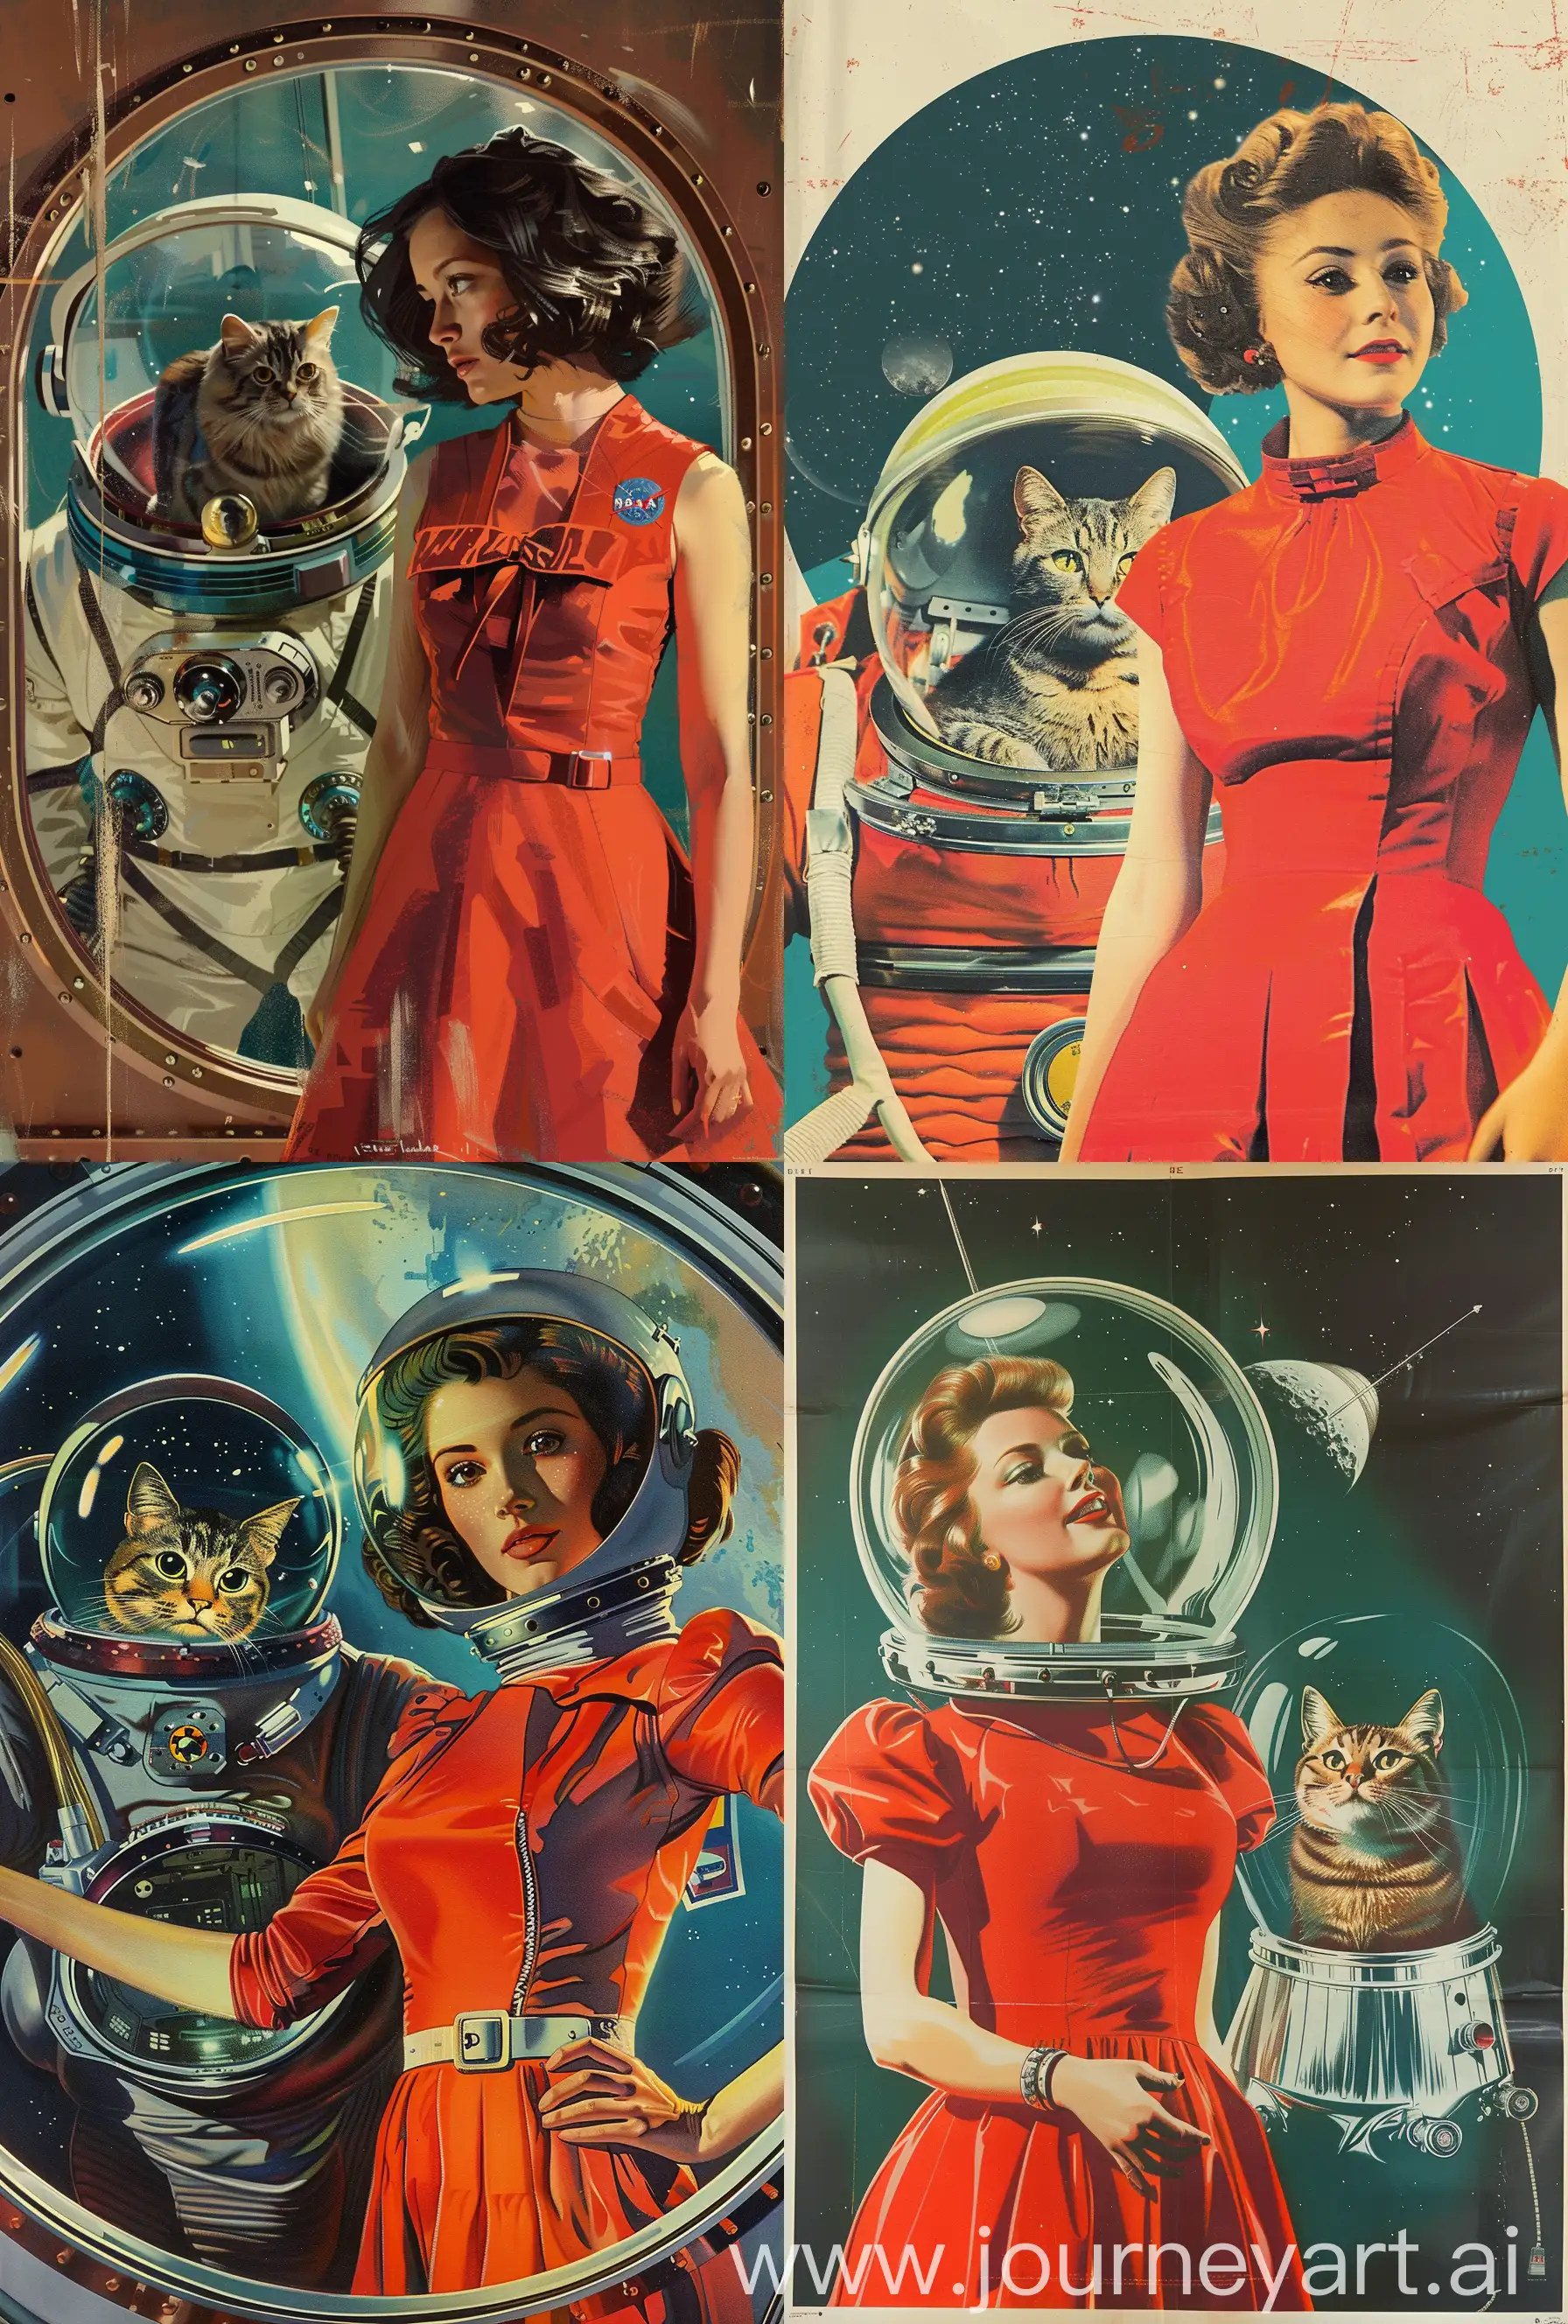 Retro-SciFi-Movie-Poster-Space-Traveler-Girl-with-Cat-in-Spacesuit